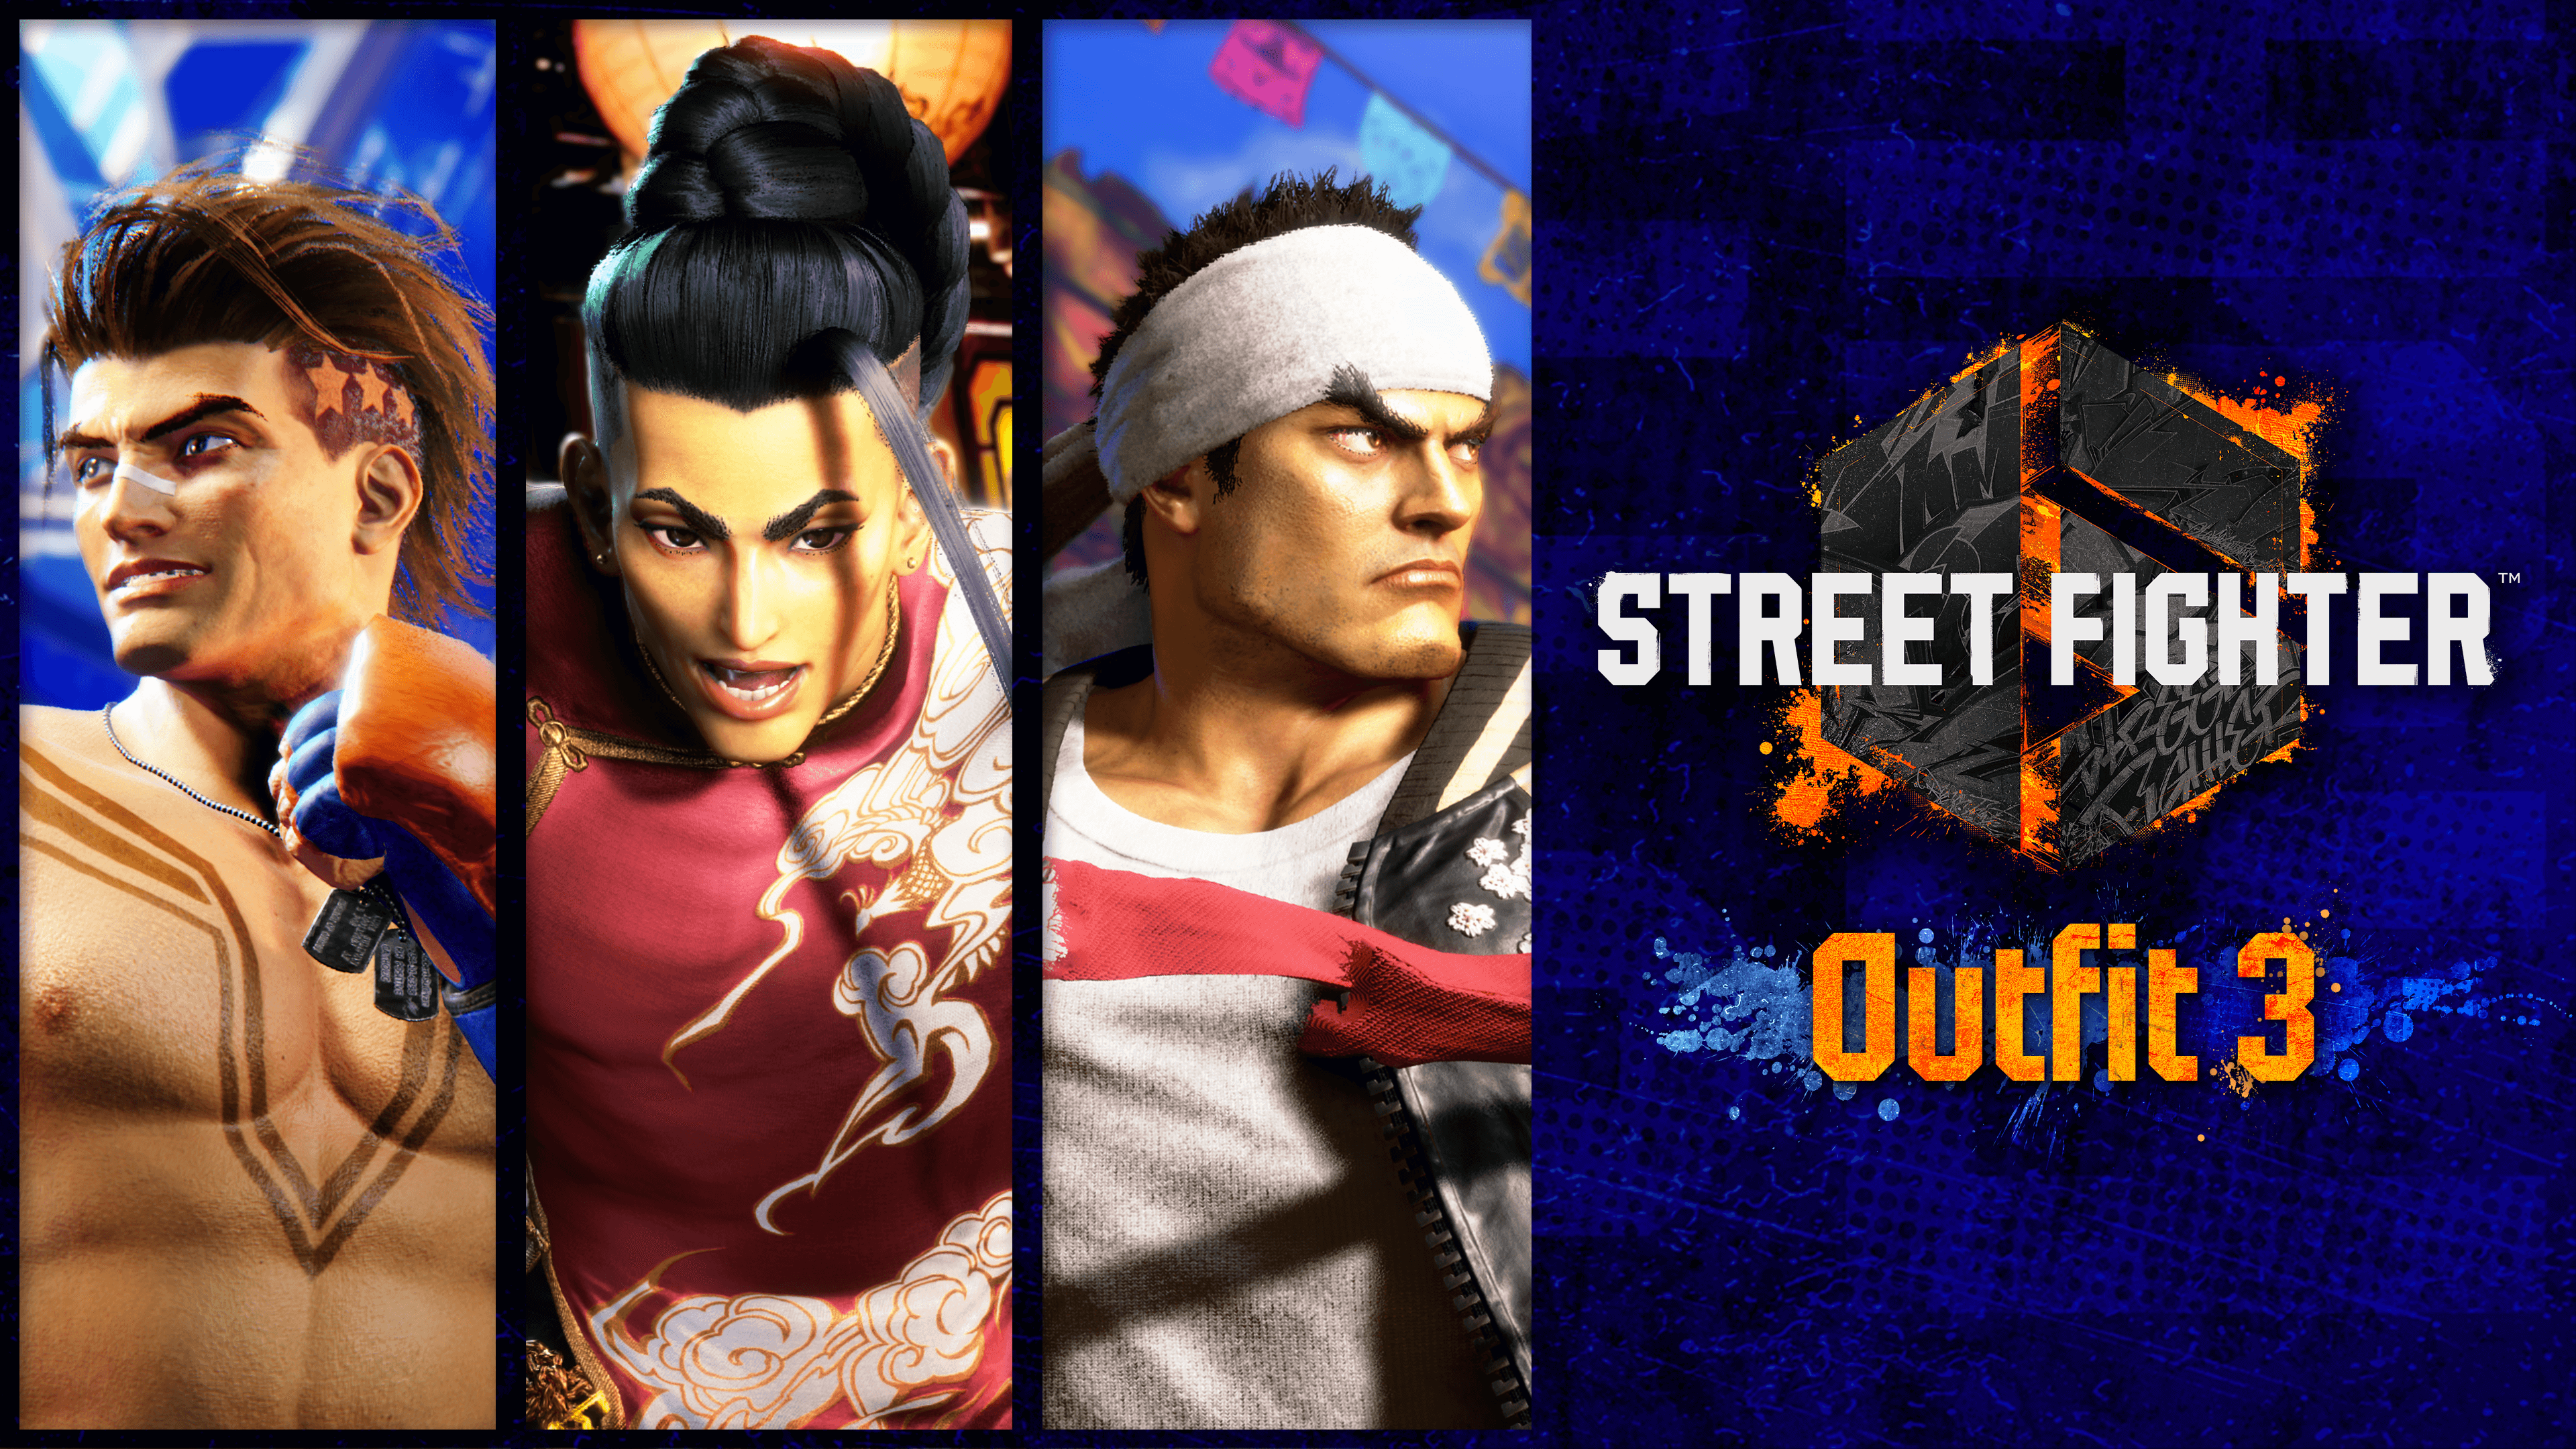 Street Fighter 6 December Updates Brings New Outfits, Music, & More